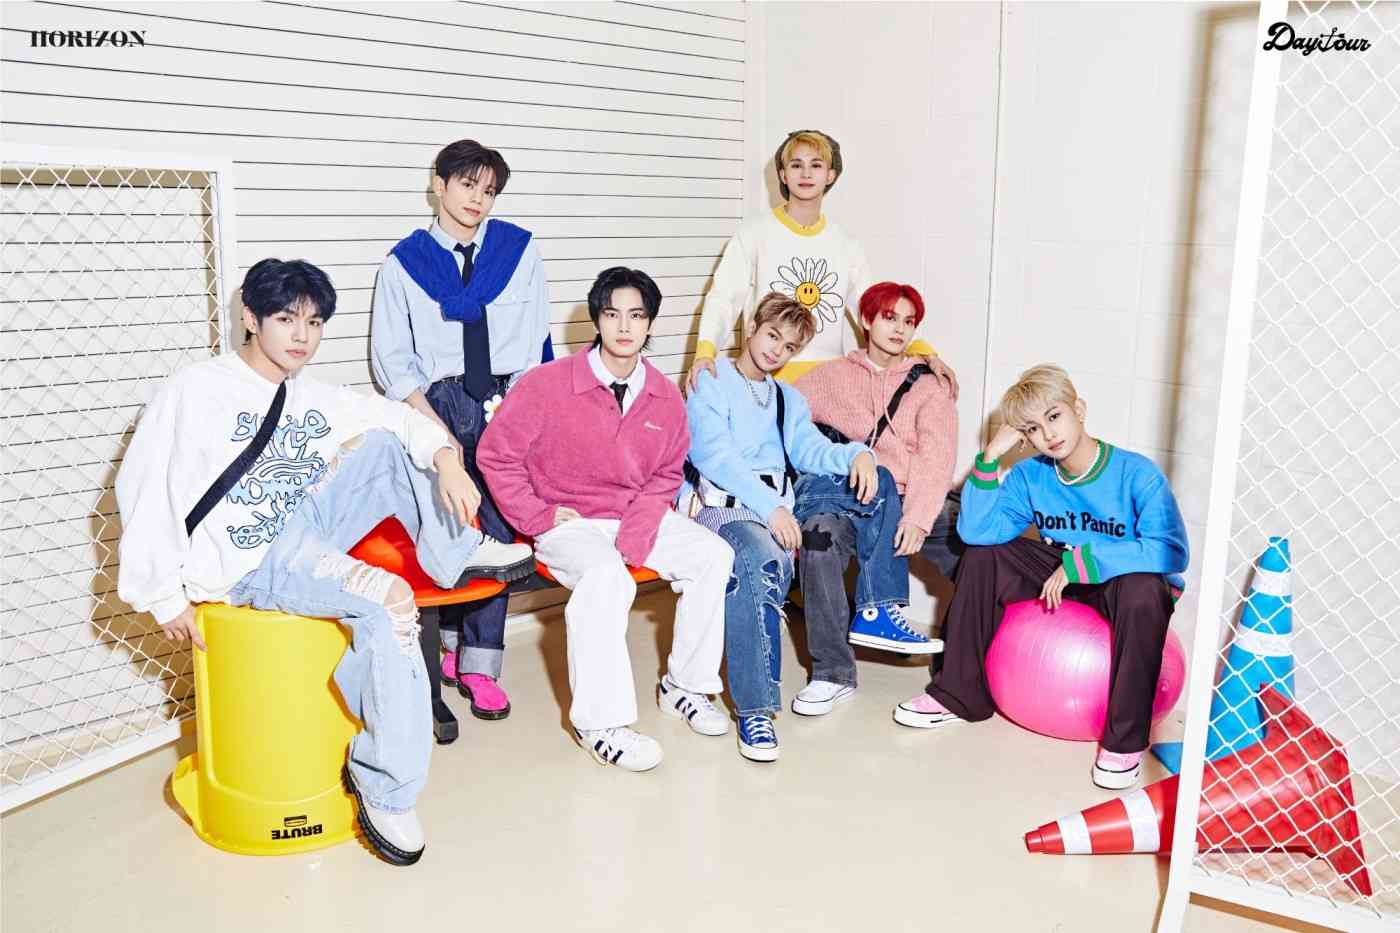 LOOK: HORI7ON unveils youthful concept photo for first single "LUCKY"